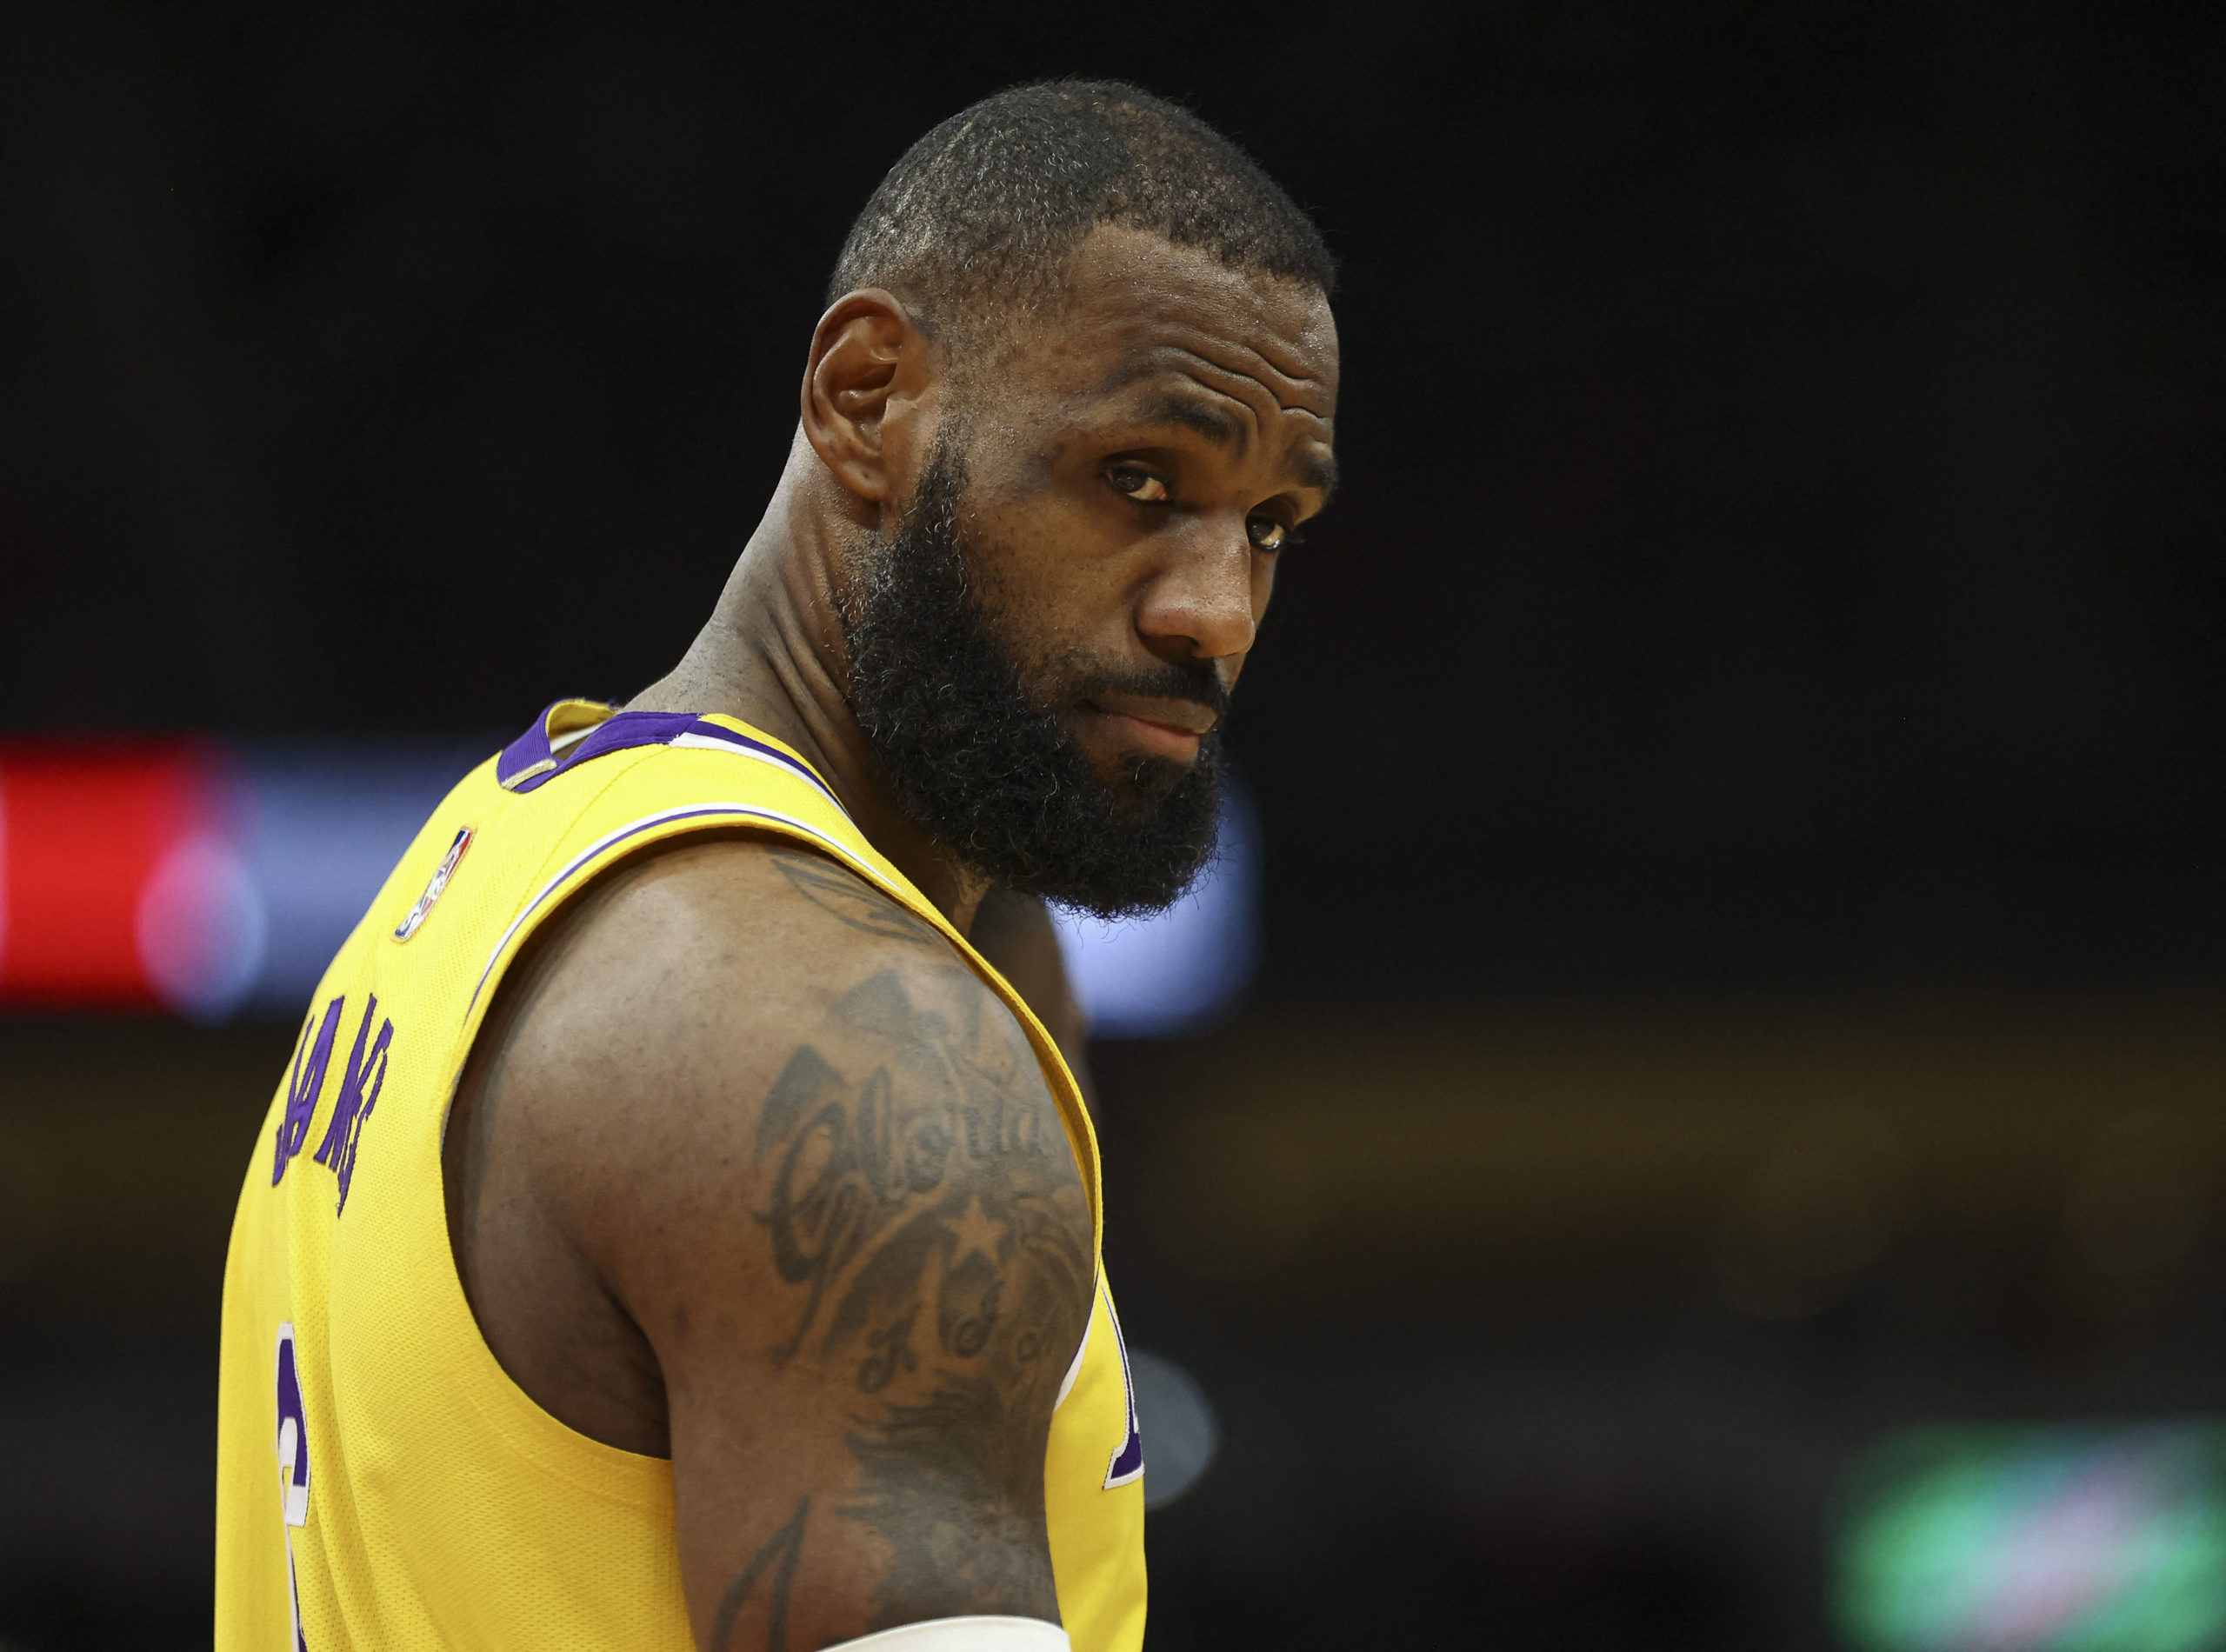 Los Angeles Lakers forward LeBron James (6) reacts after a play during the fourth quarter against the Houston Rockets at Toyota Center. Dec 28, 2021; Houston, Texas, USA;